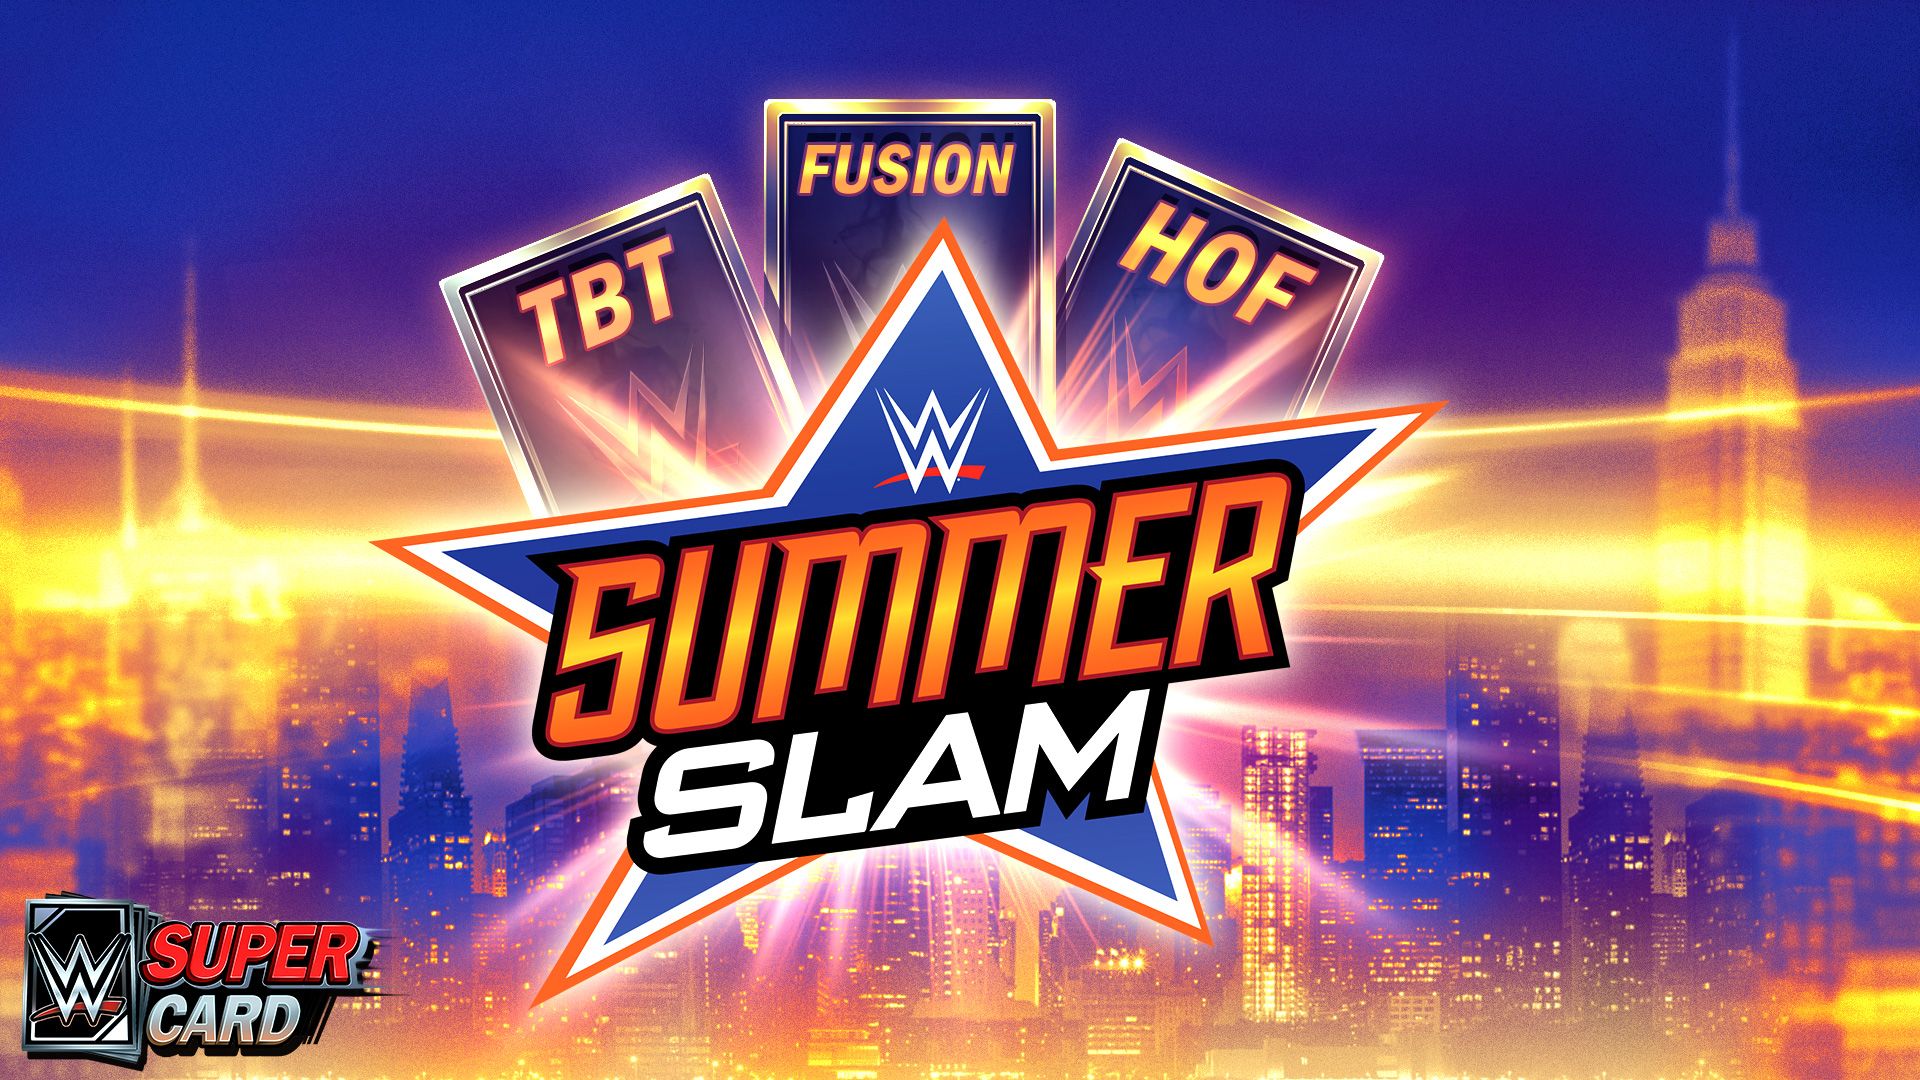 WWE SuperCard: New SummerSlam '18 Throwback, Fusion and Hall